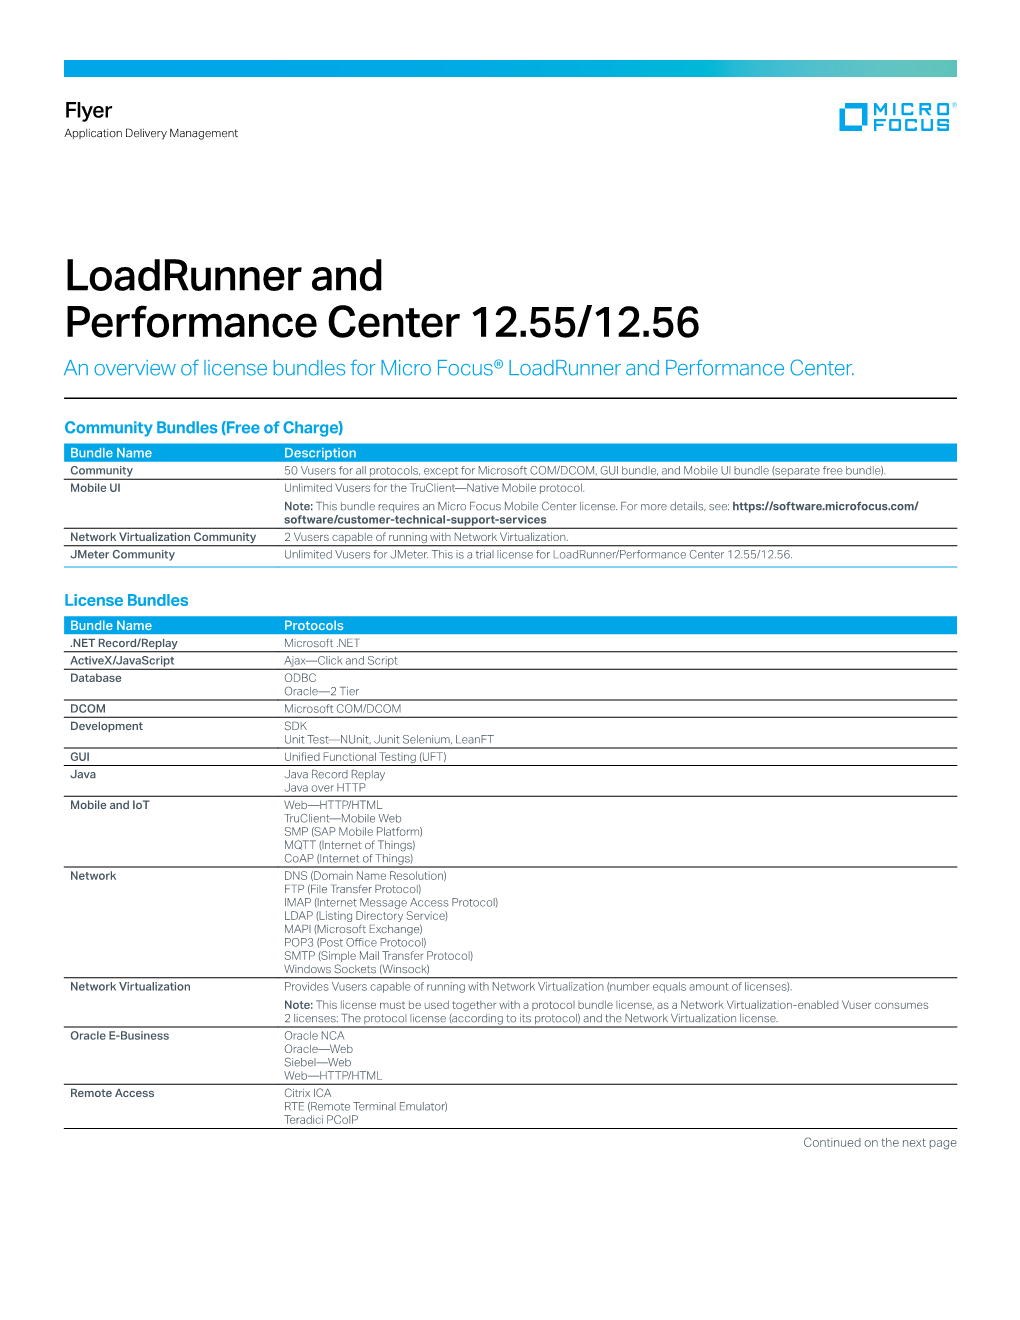 Loadrunner and Performance Center 12.55/12.56 an Overview of License Bundles for Micro Focus® Loadrunner and Performance Center